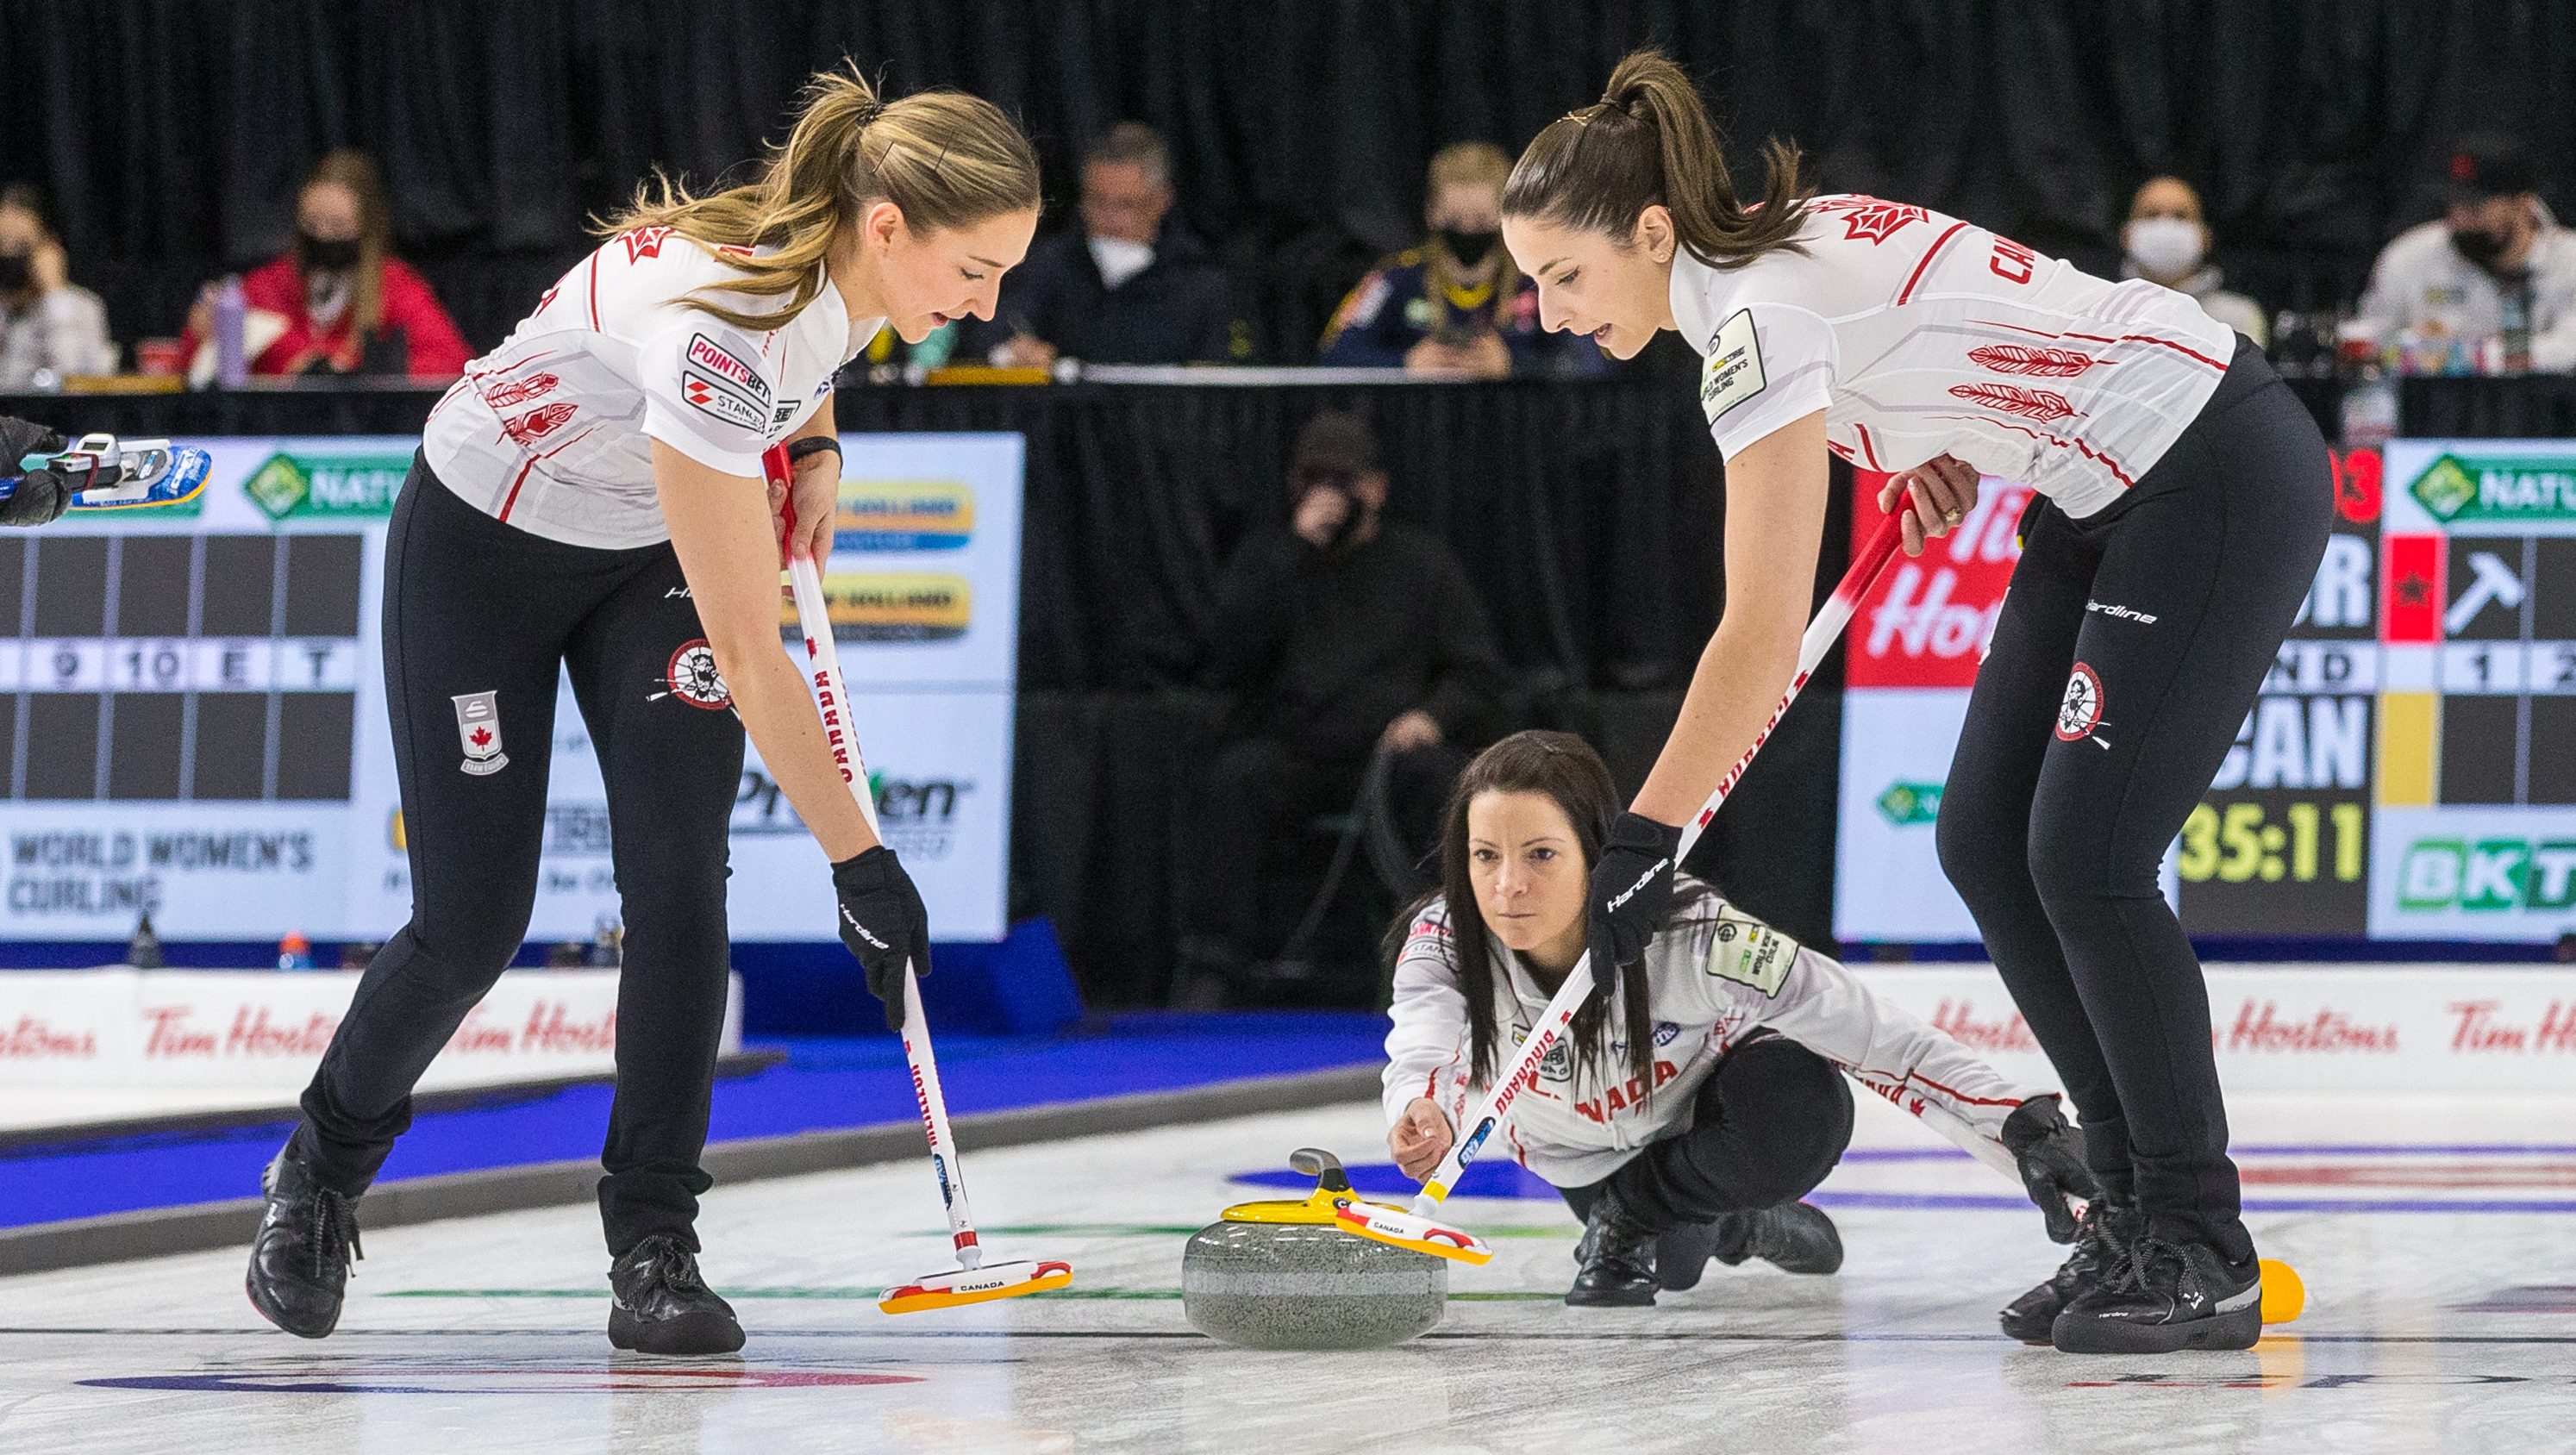 Team Einarson qualifies Canada for the playoffs at Women's World Curling  Championship - Team Canada - Official Olympic Team Website